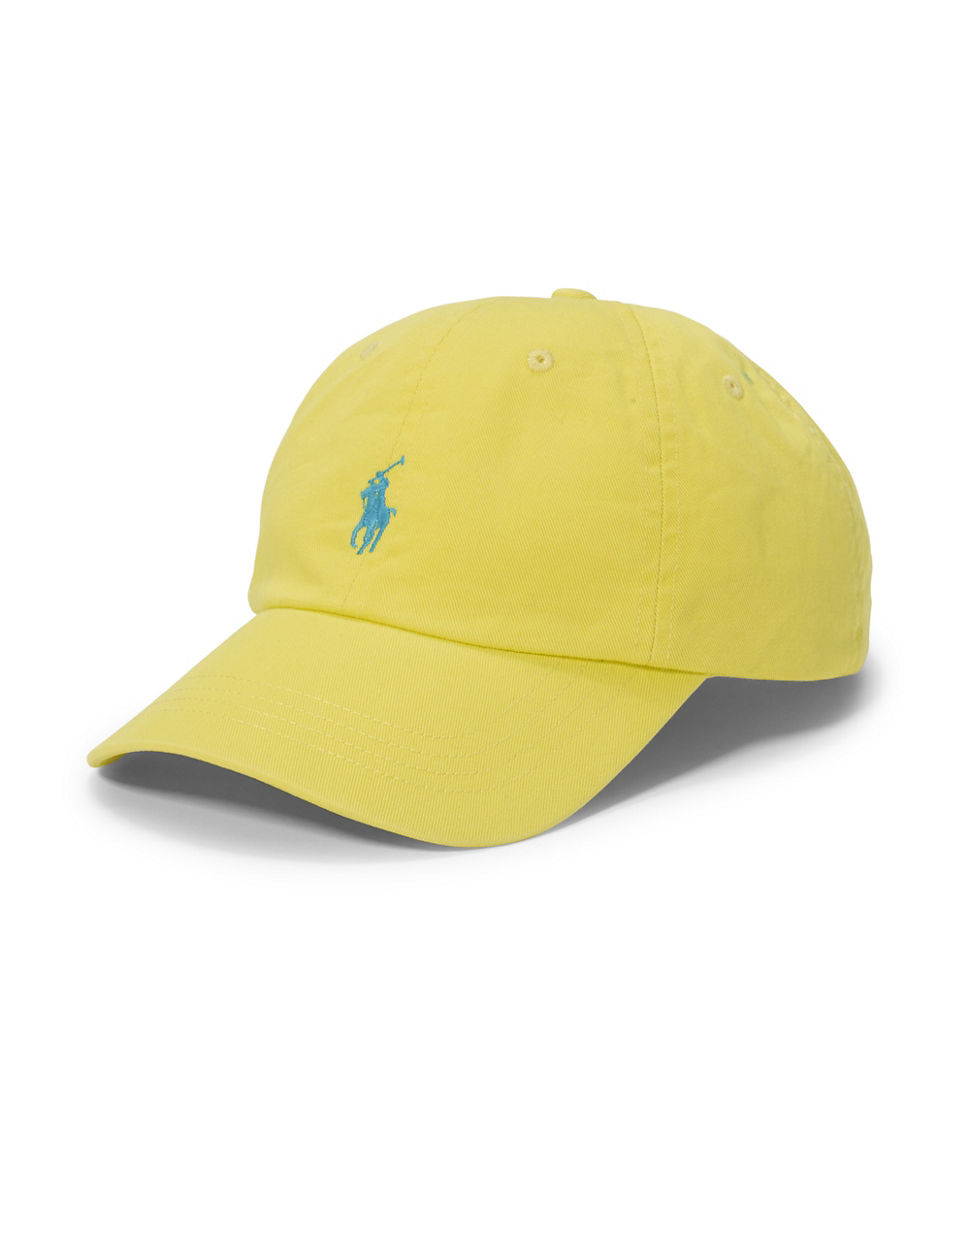 Polo ralph lauren Classic Chino Sports Cap in Yellow for Men - Save 40% ...